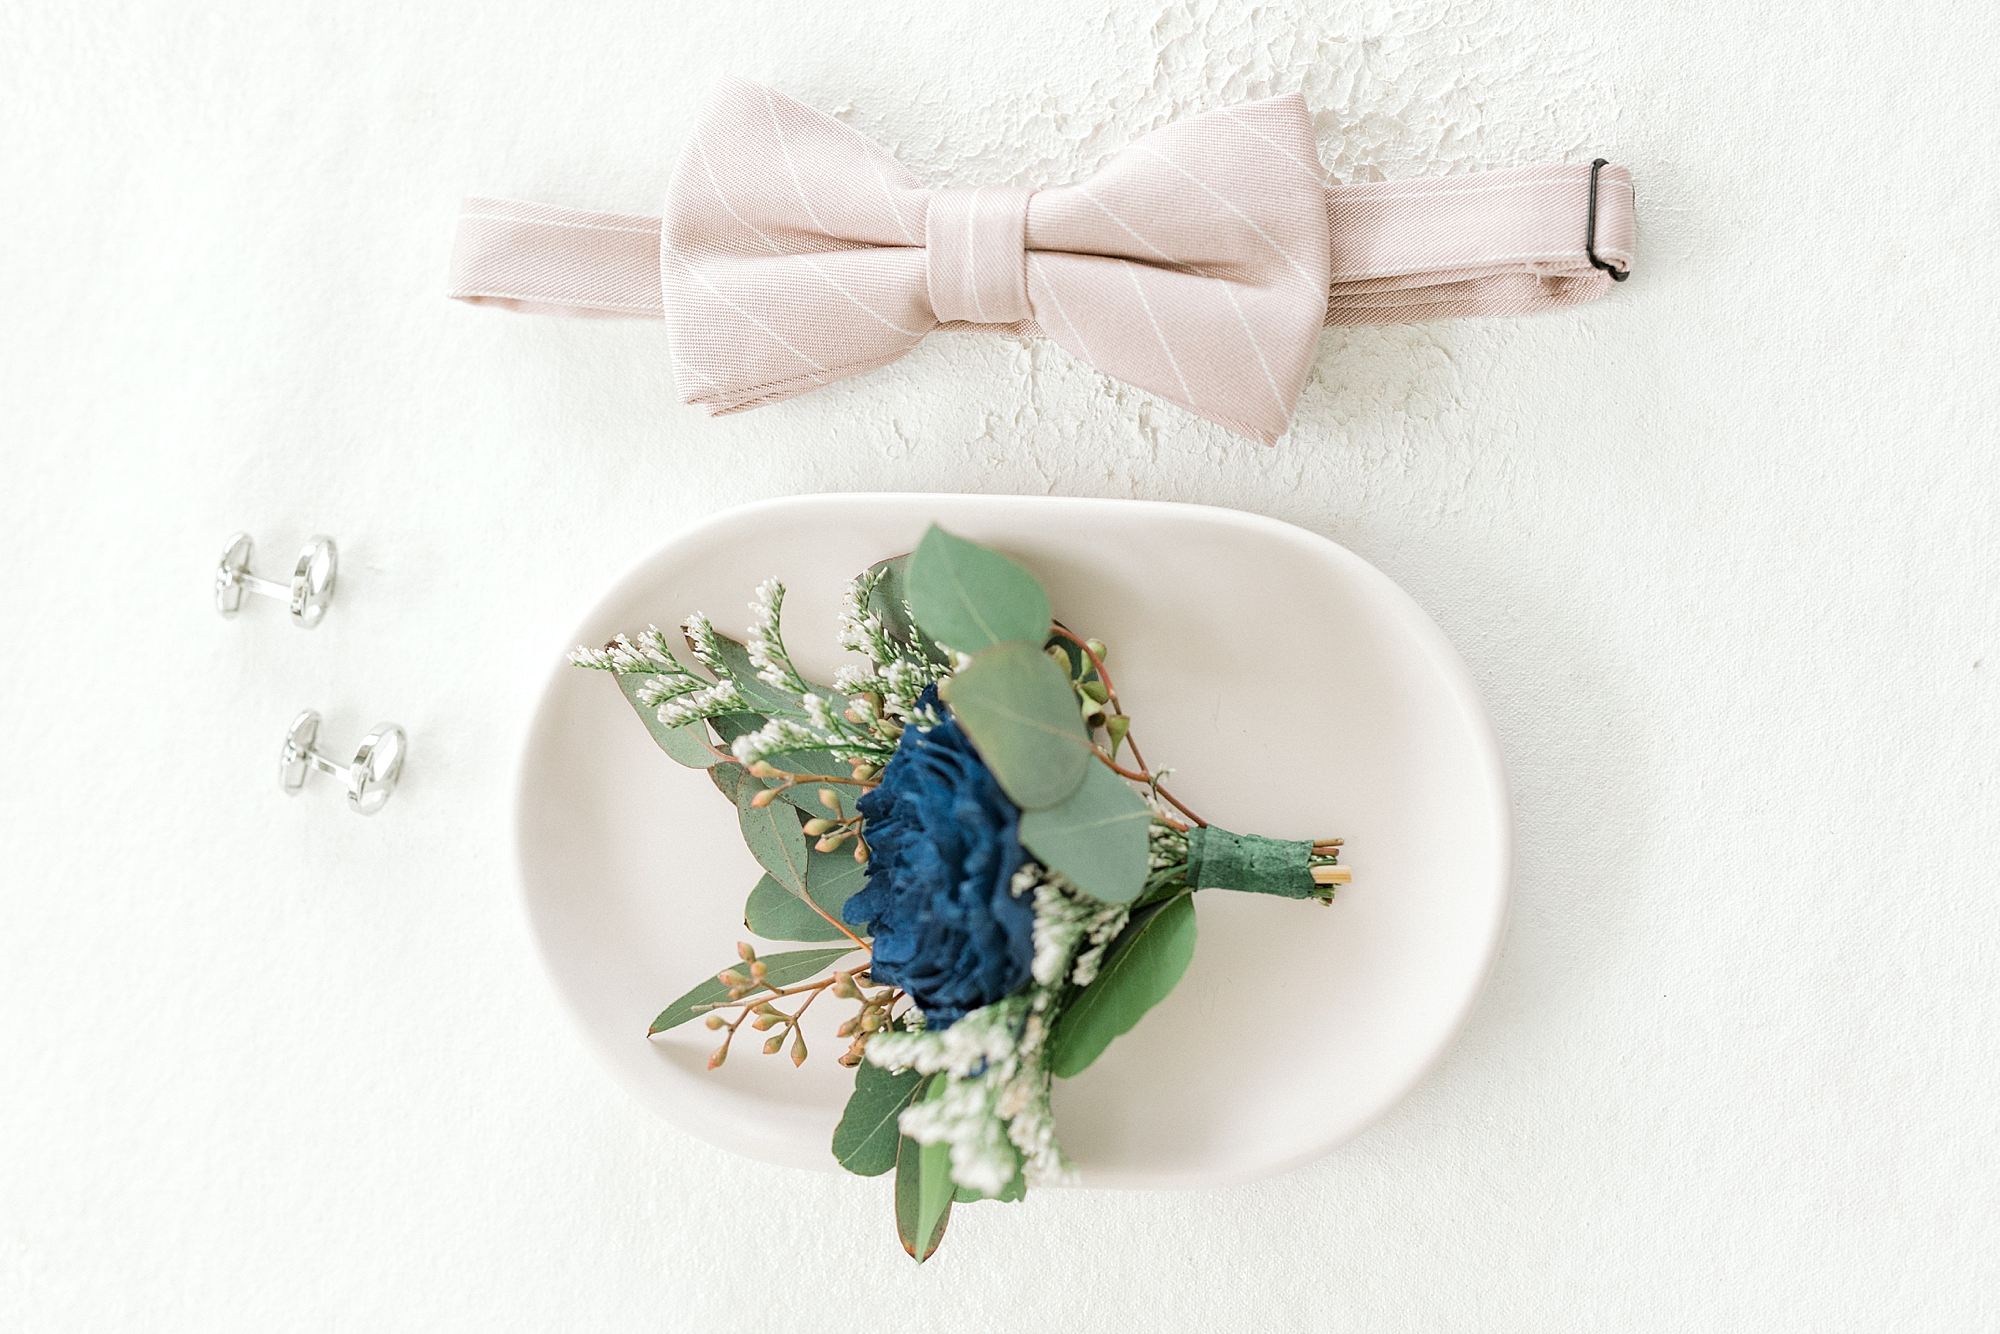 groom's pink bowtie and boutonnière with blue flowers